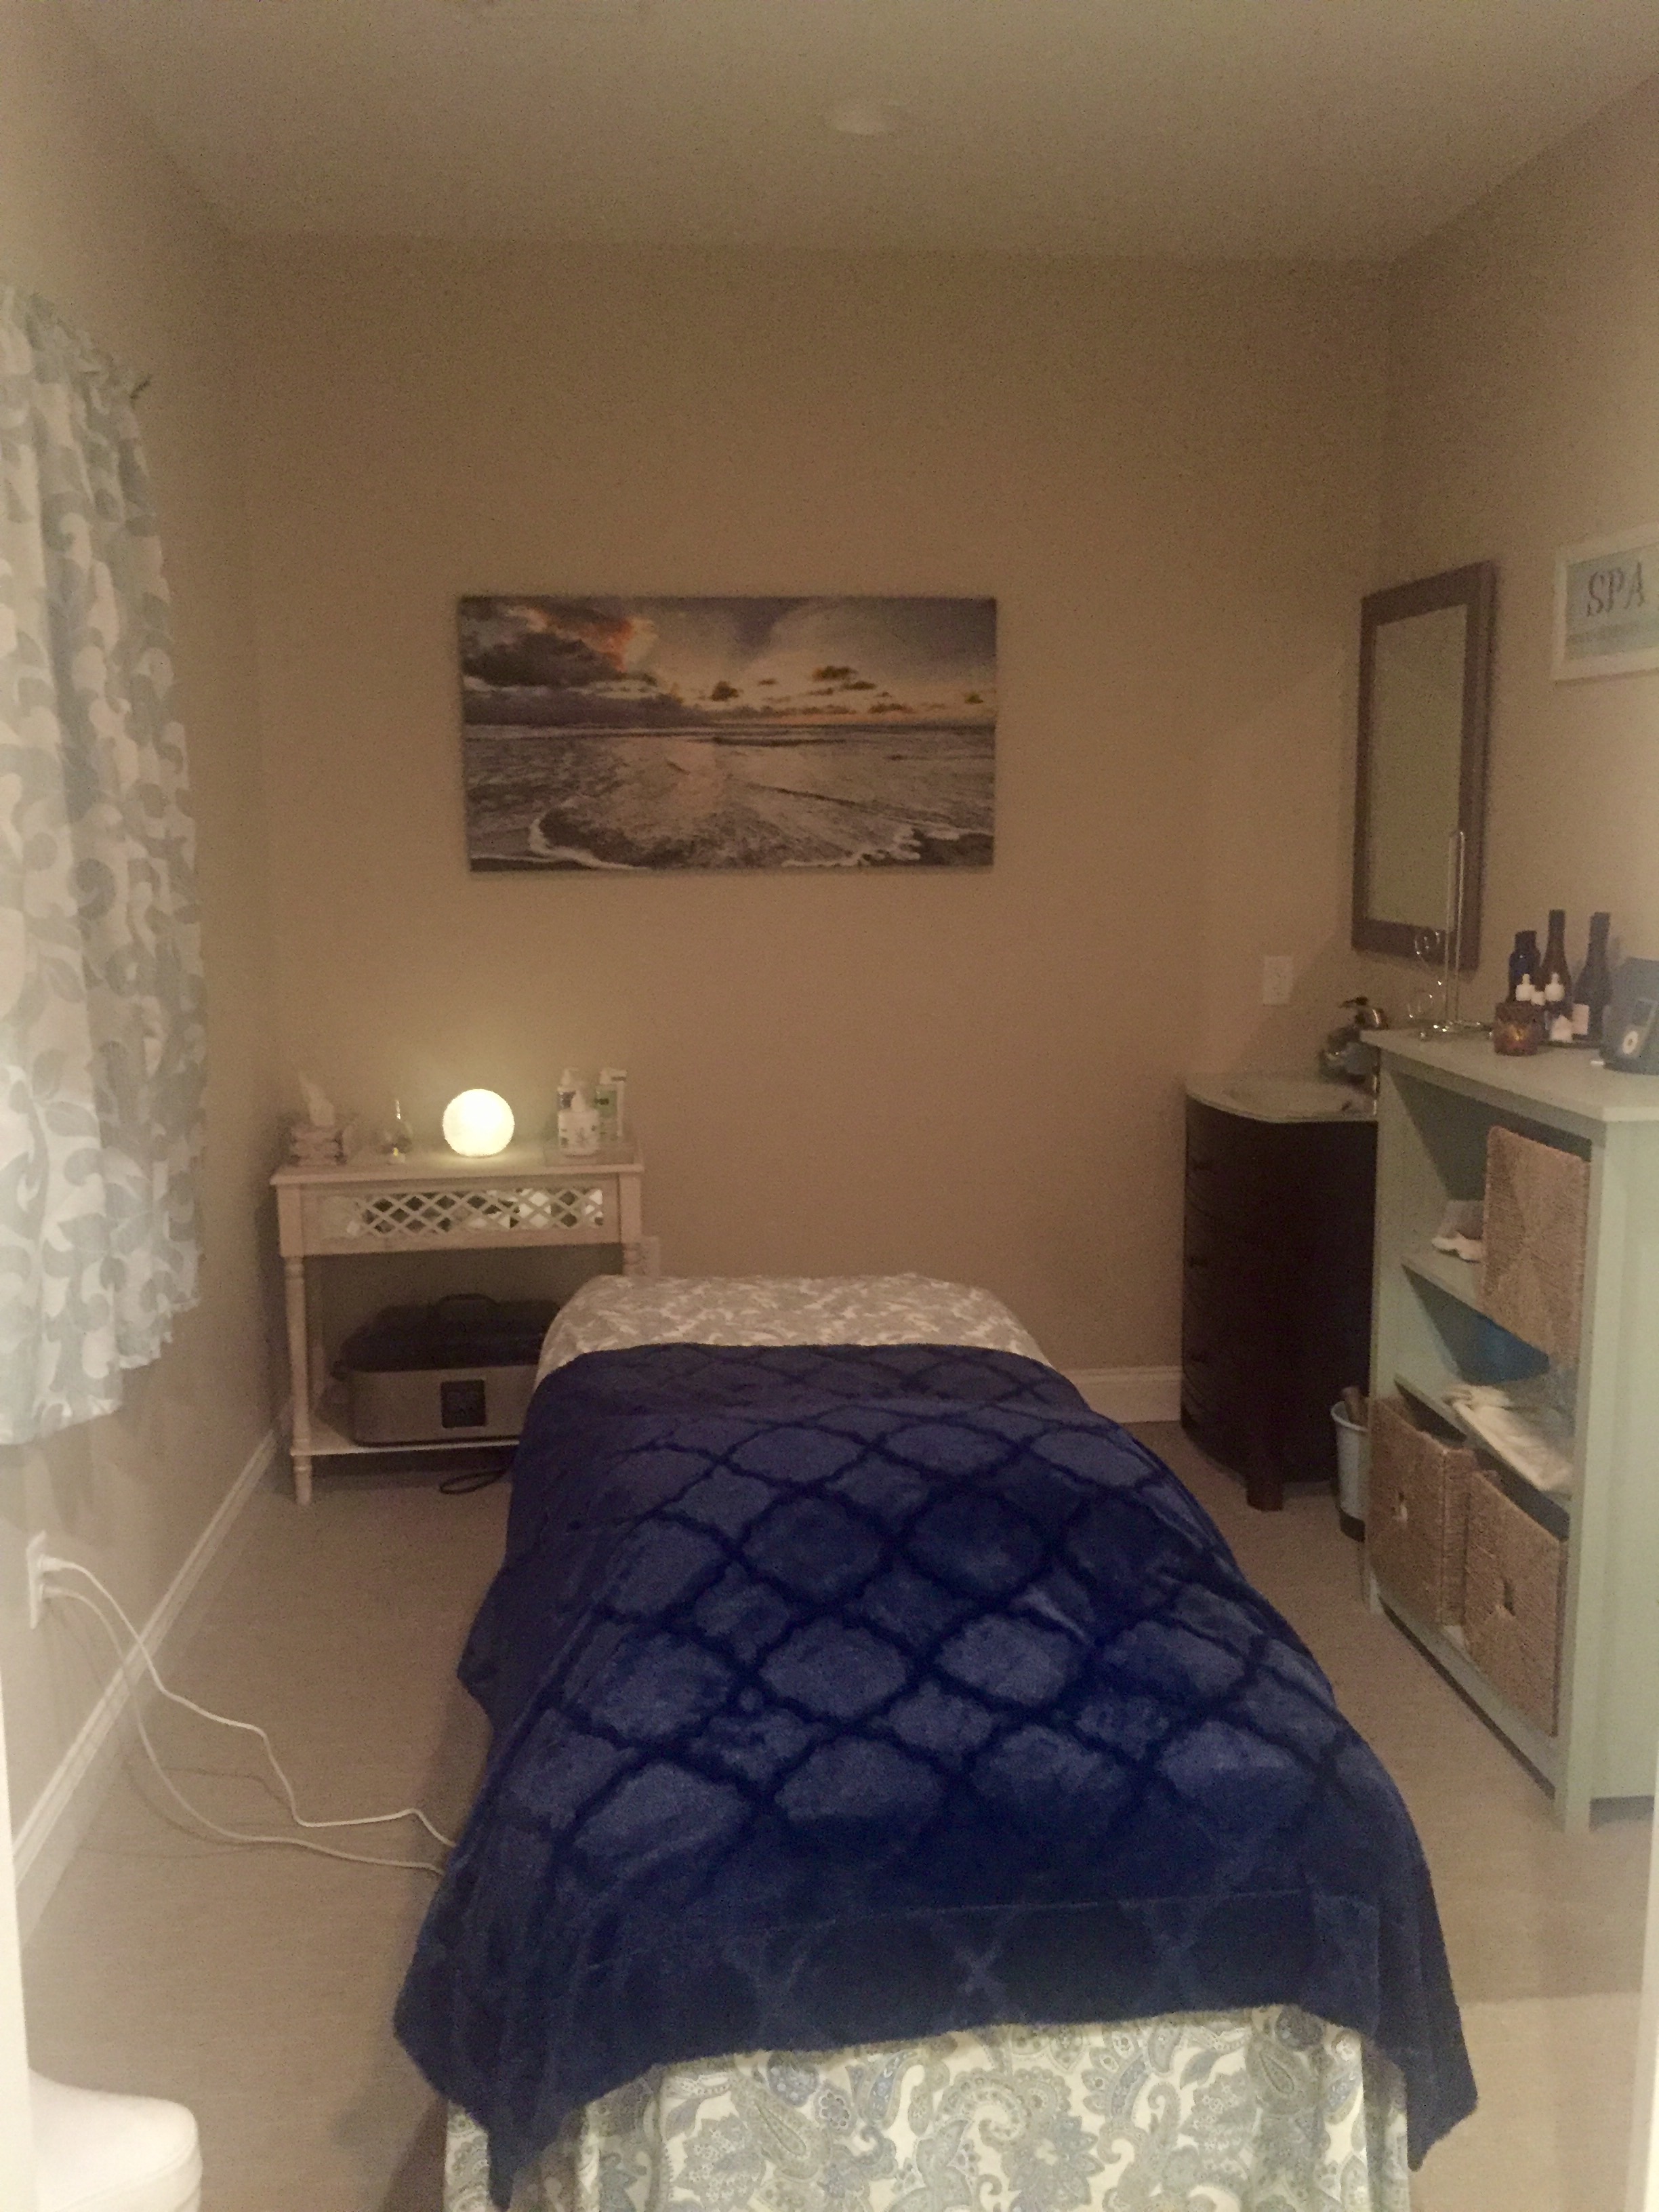 Massage Therapy Room #1